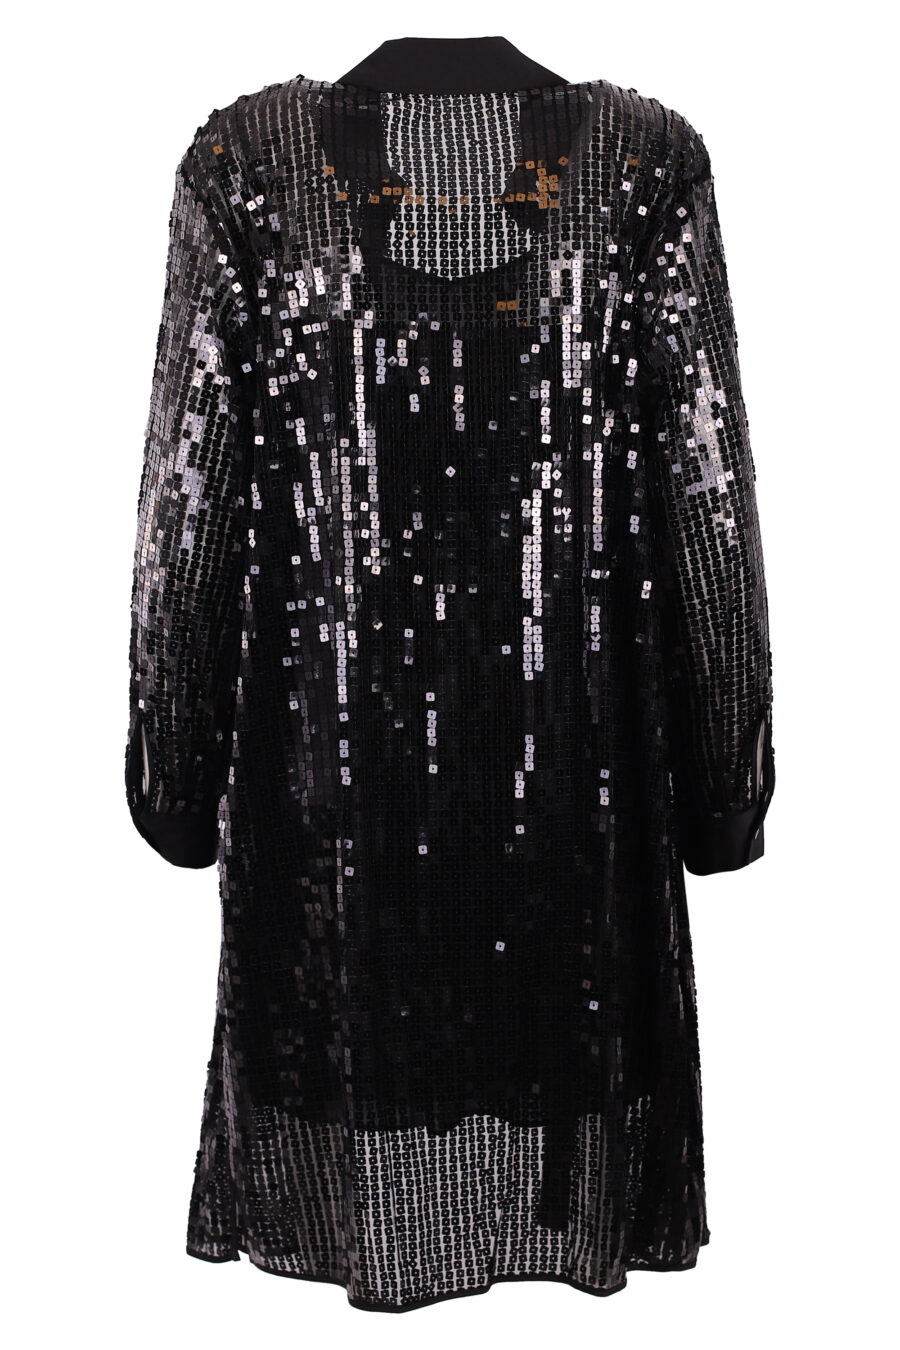 Black tunic dress with sequins - IMG 6264